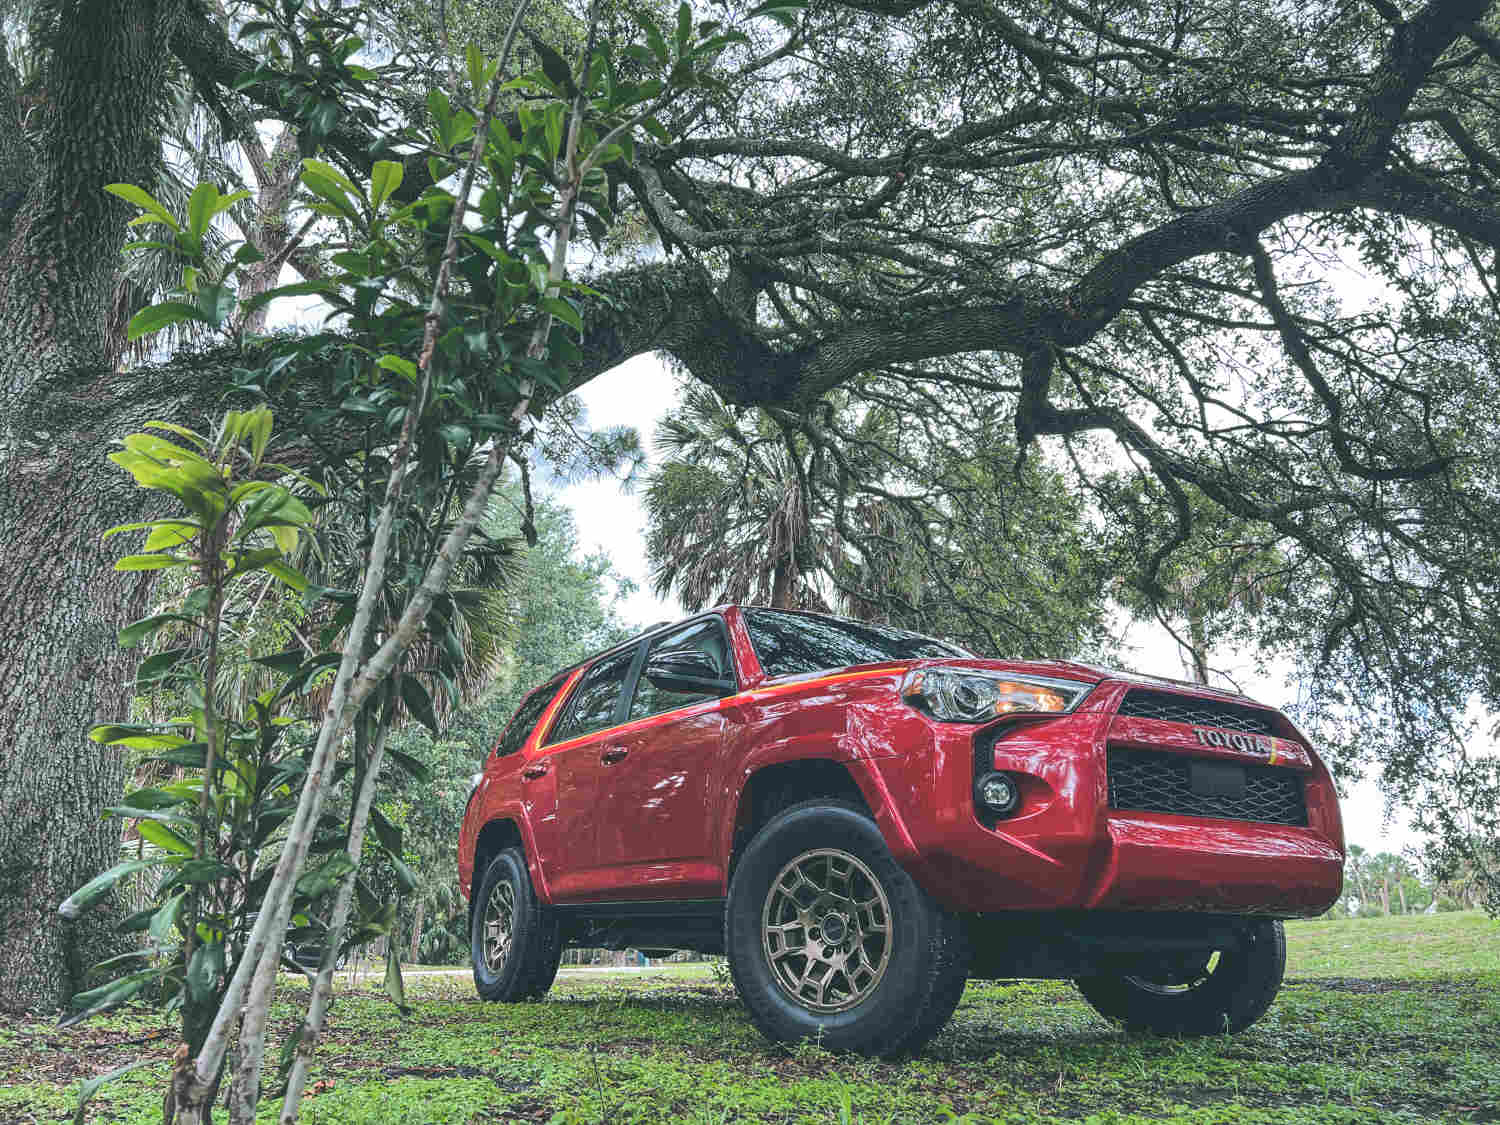 The 2023 Toyota 4Runner is one of the most reliable midsize SUVs